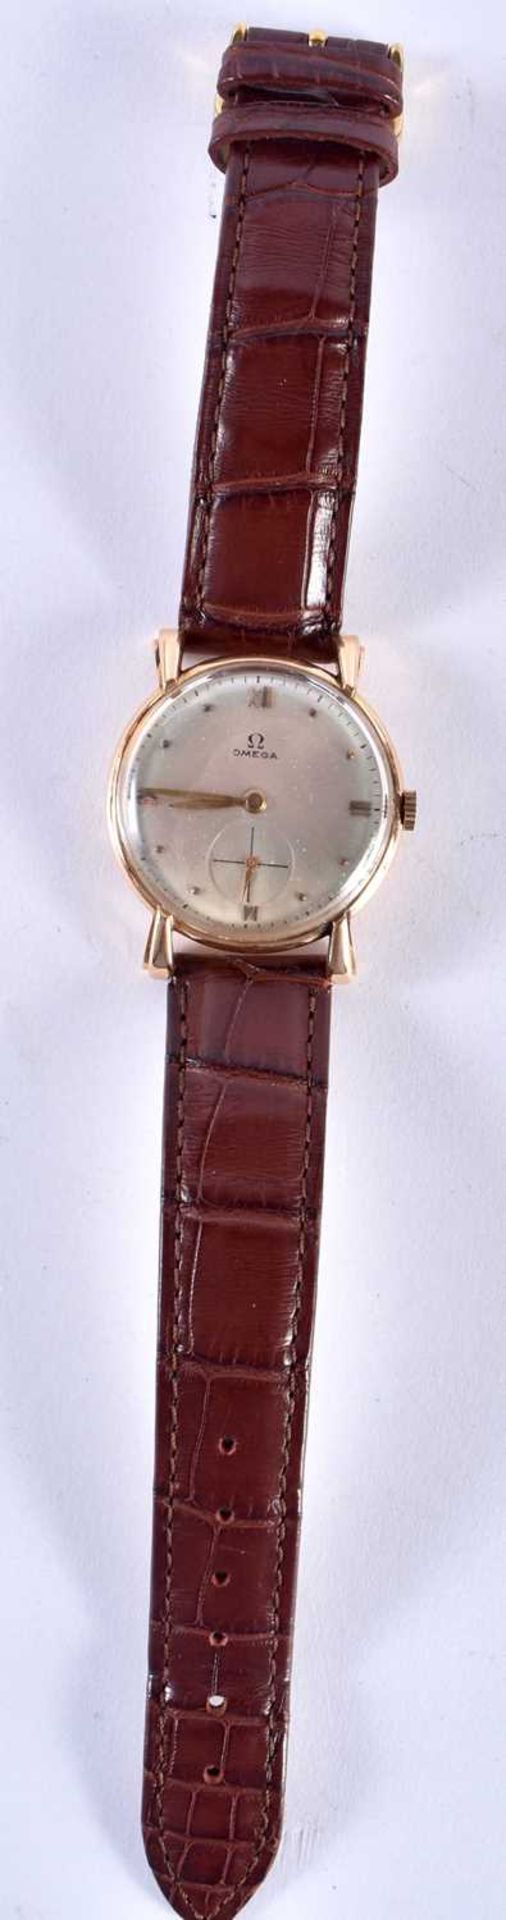 A VINTAGE 18CT GOLD OMEGA WRIST WATCH. 33.1 grams overall. 3.25 cm wide inc crown. - Image 2 of 4